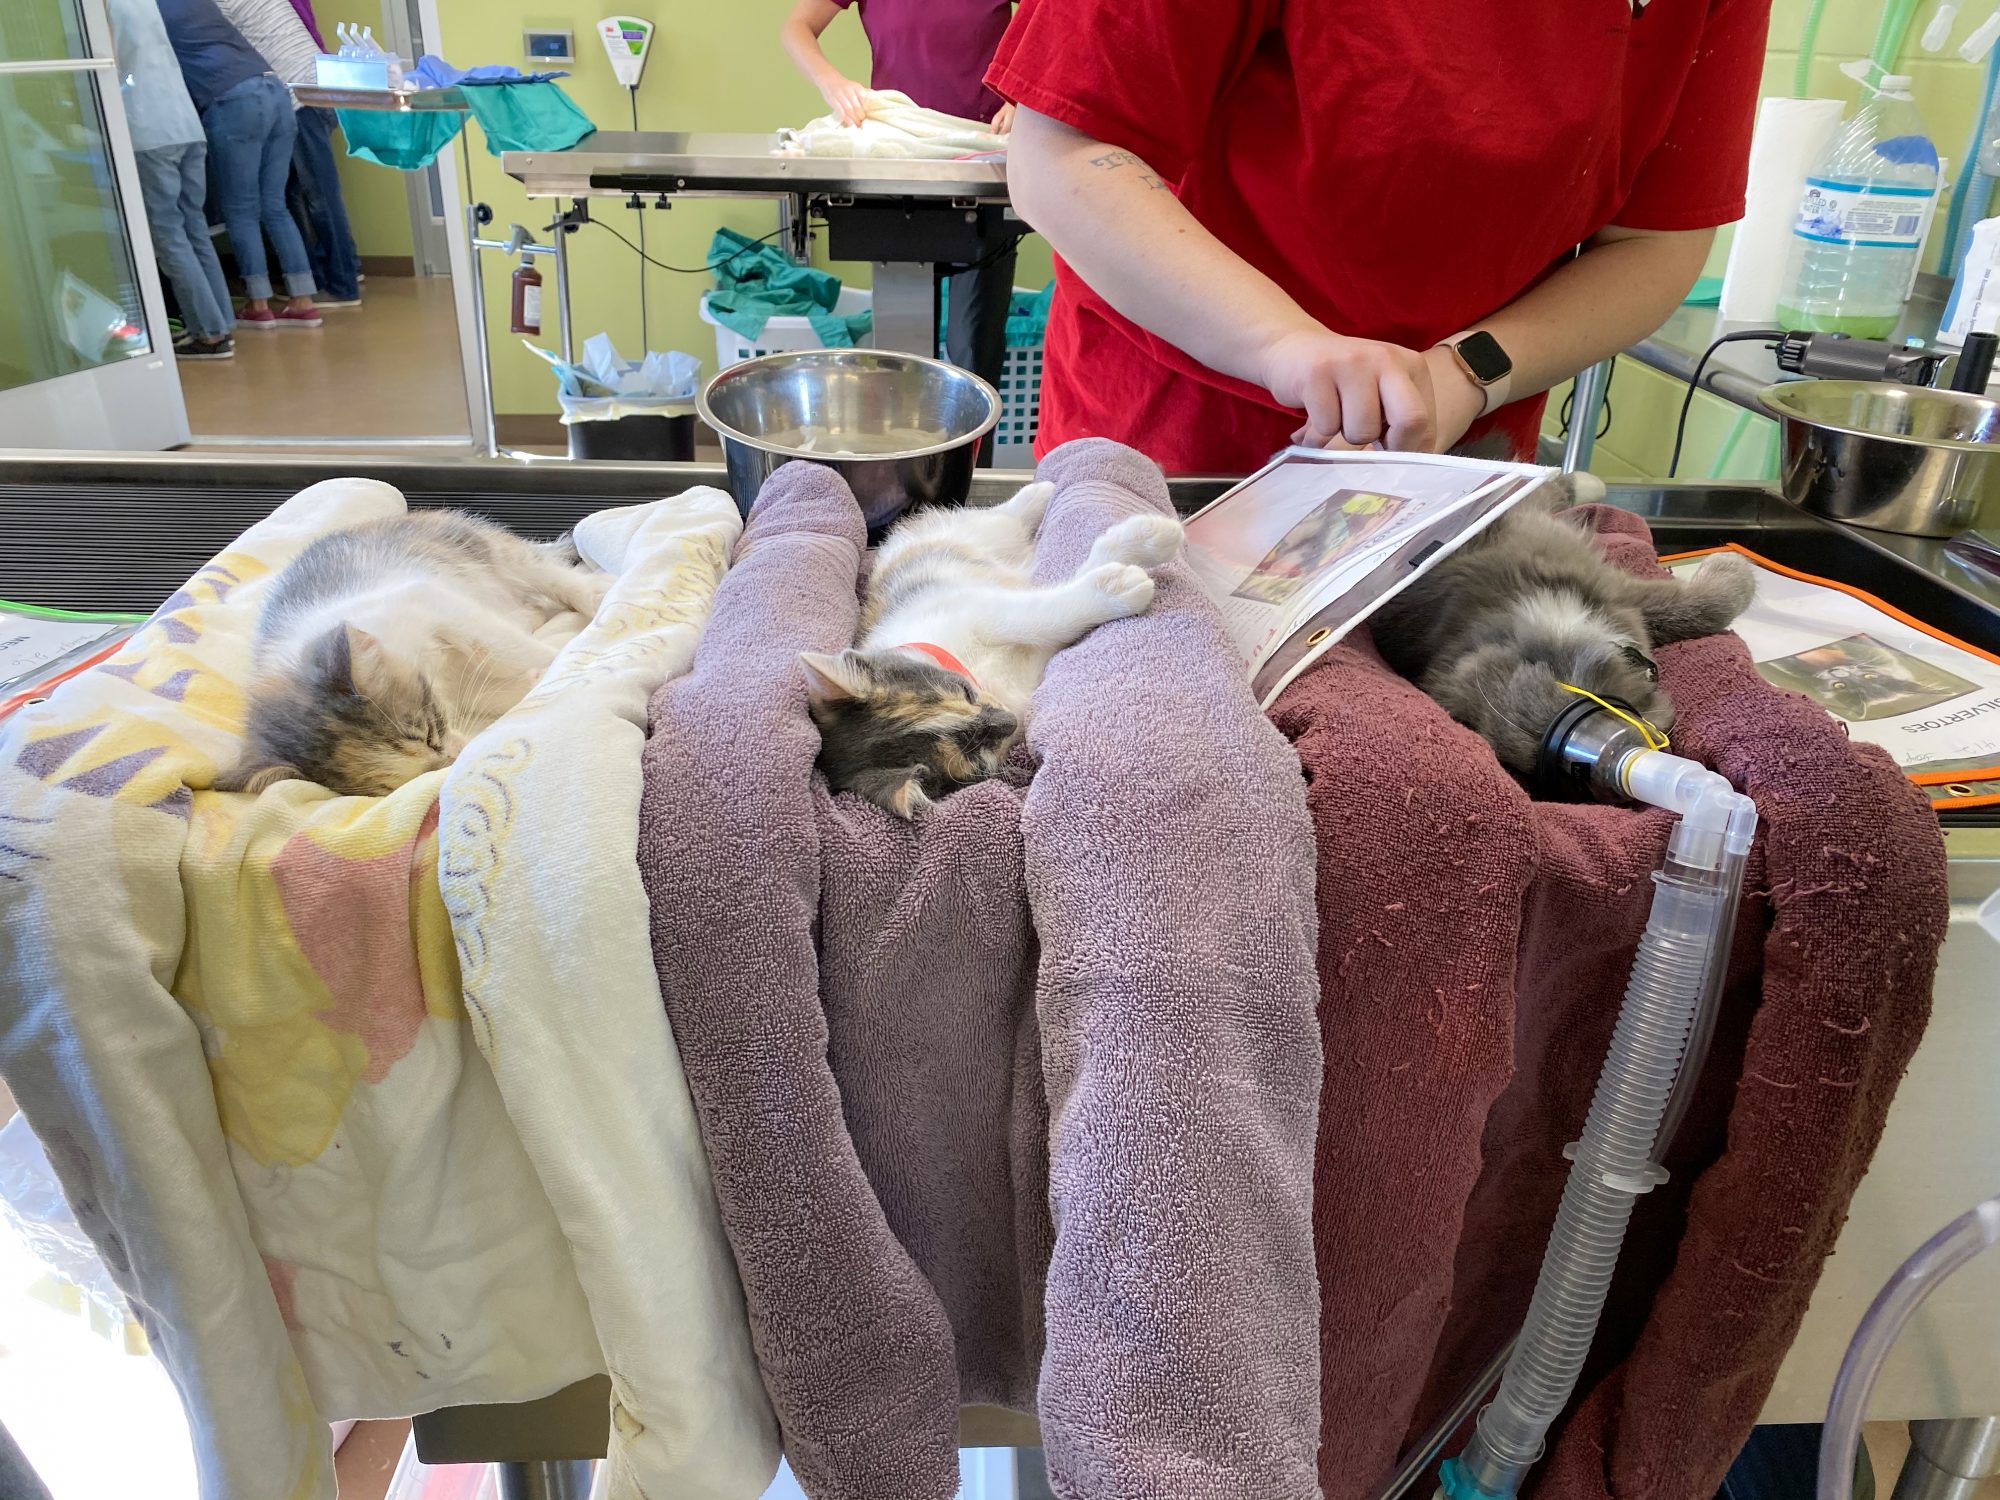 Three kittens getting prepped for surgery. On an average day, we spay and neuter between 20-25 kittens, puppies, dogs, and cats.